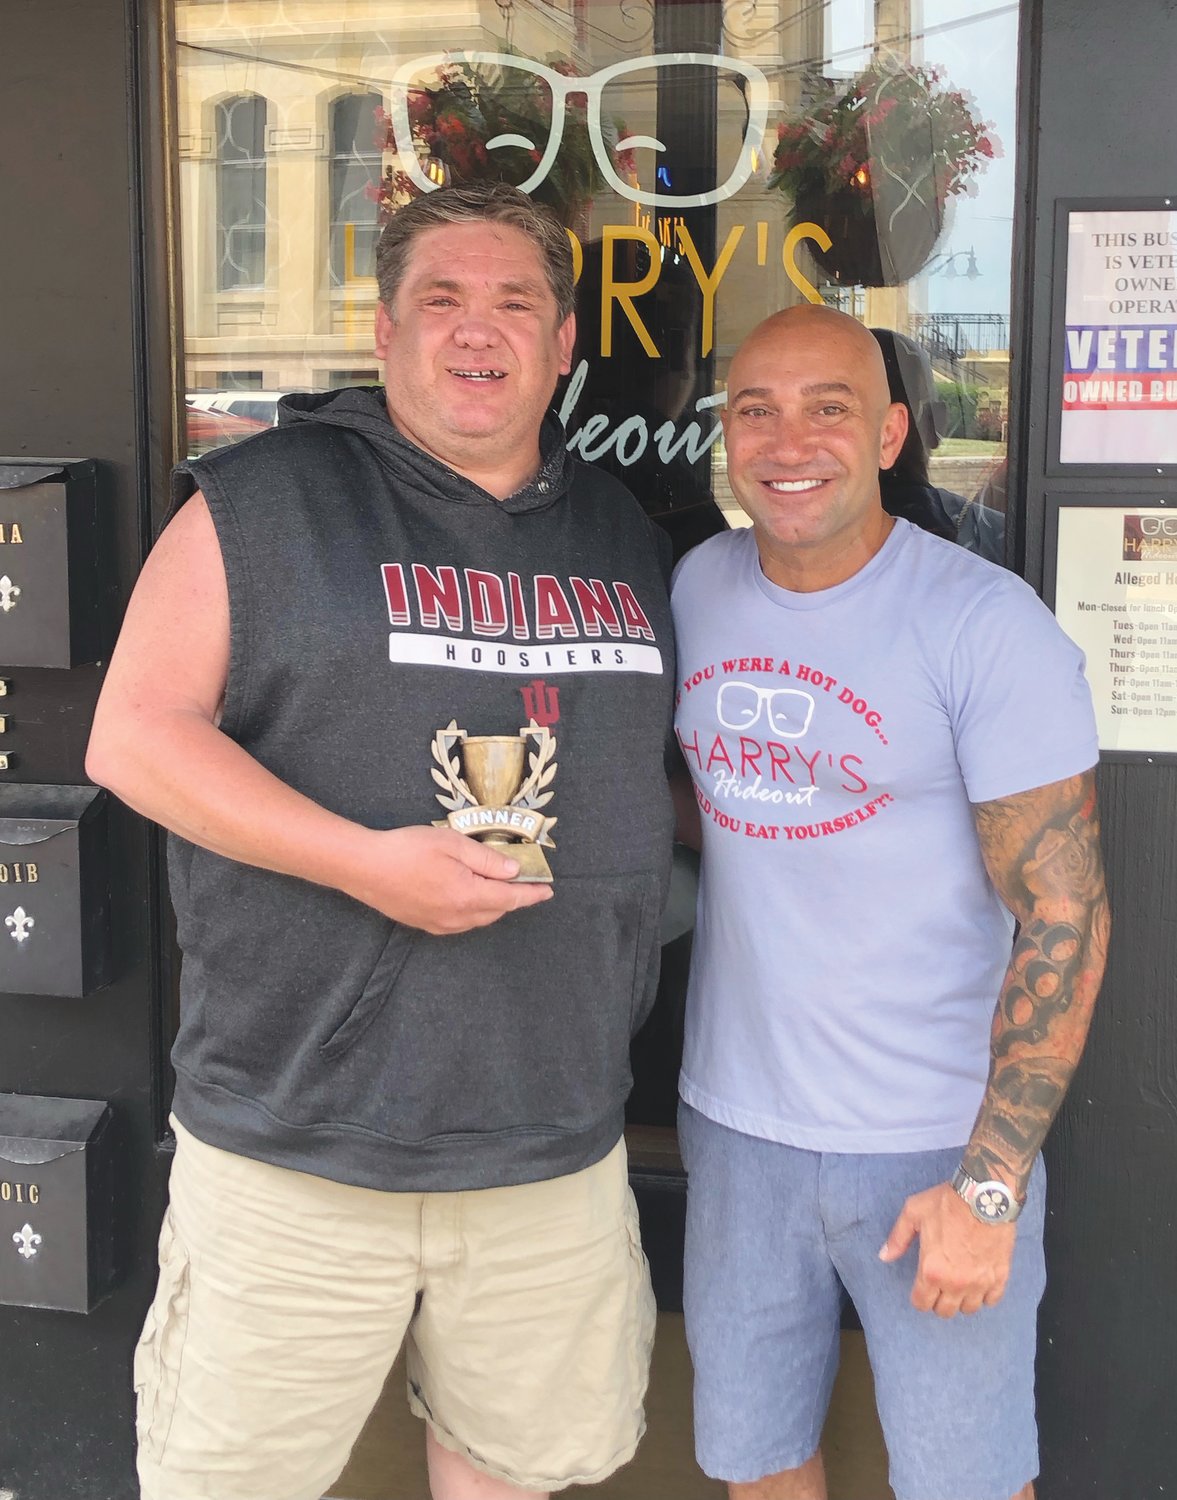 Roy Walters, left, was the winner of the first-ever Harry’s Hotdog Eating Contest. He consumed eight hotdogs in five minutes. He is pictured with Harry’s owner Chris Stockdale.